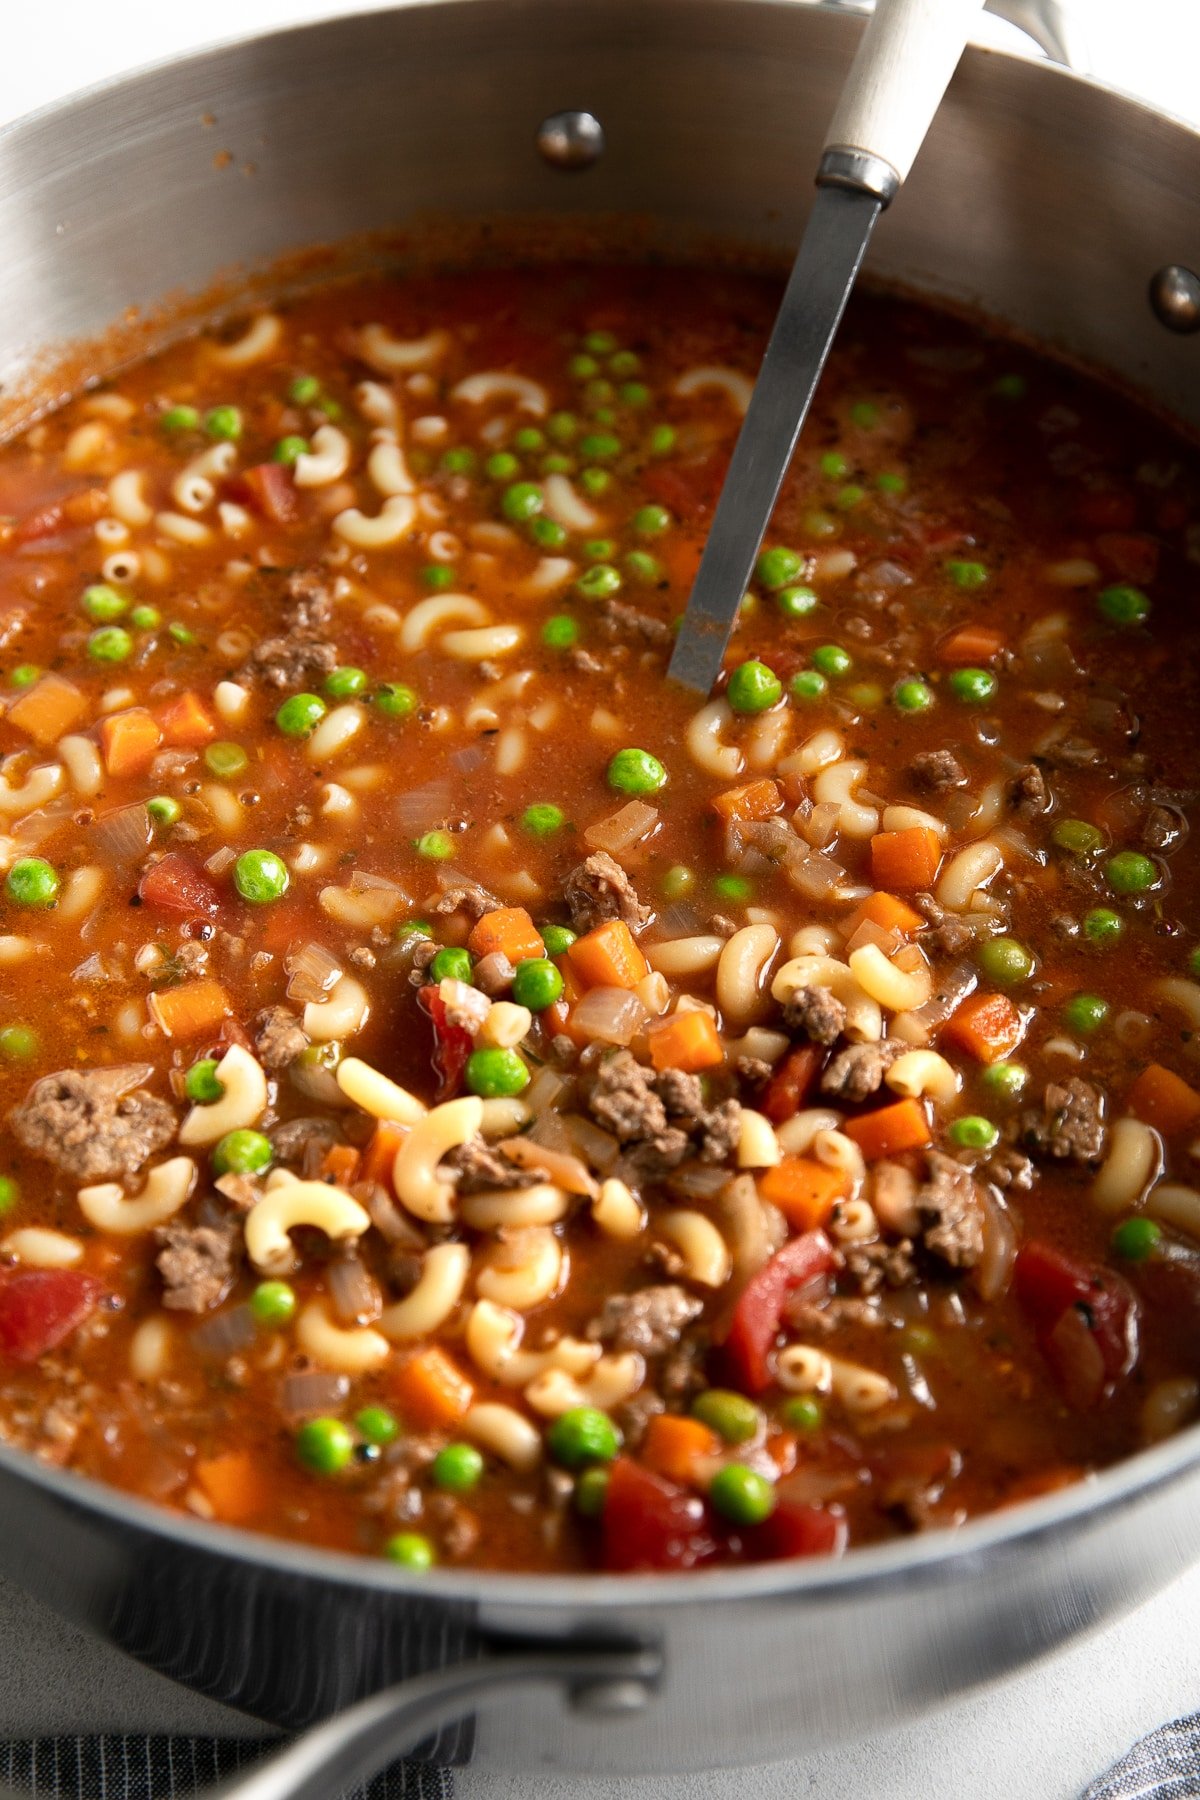 Large pot filled with Hamburger Soup made with ground beef, tomatoes, macaroni noodles, peas, and carrots.